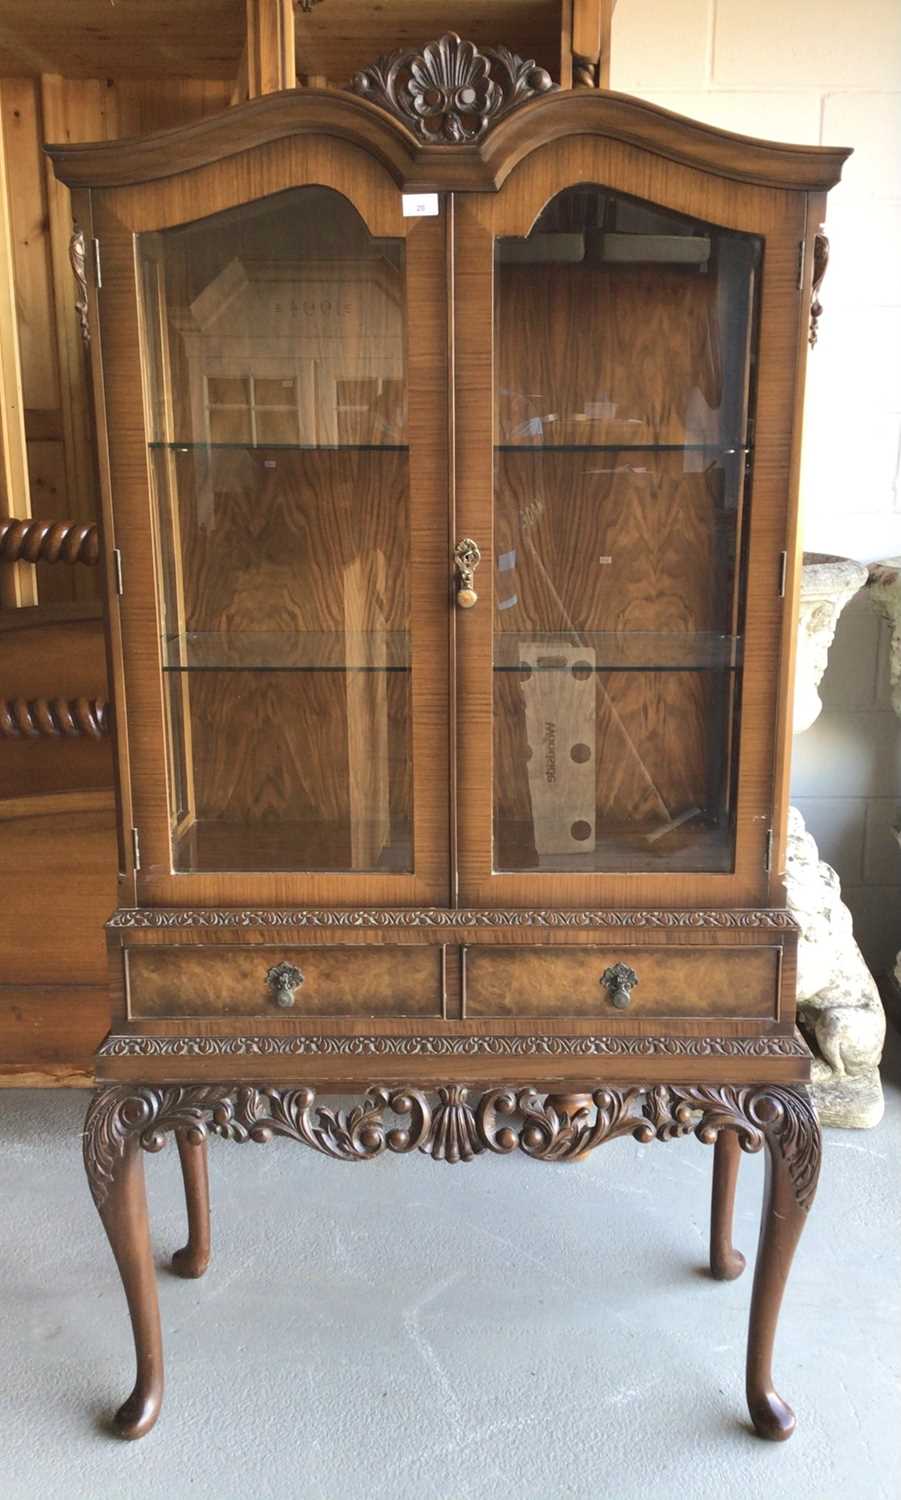 Lot 20 - Good quality Georgian style mahogany display cabinet with two drawers, carved apron on cabriole legs